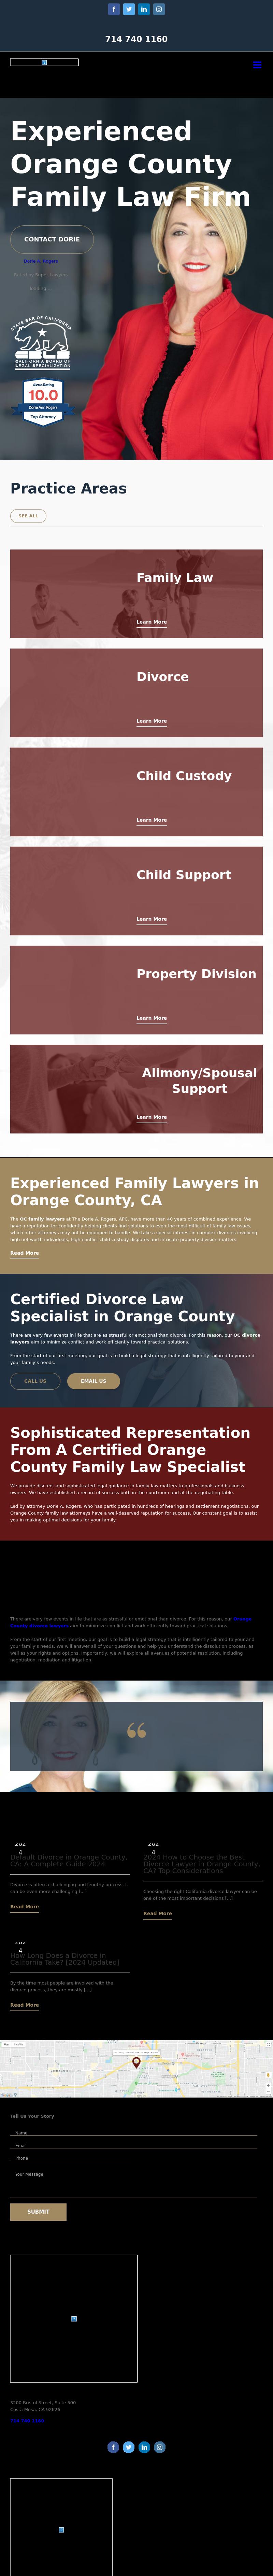 The Law Offices of Dorie A. Rogers, APC - Orange CA Lawyers